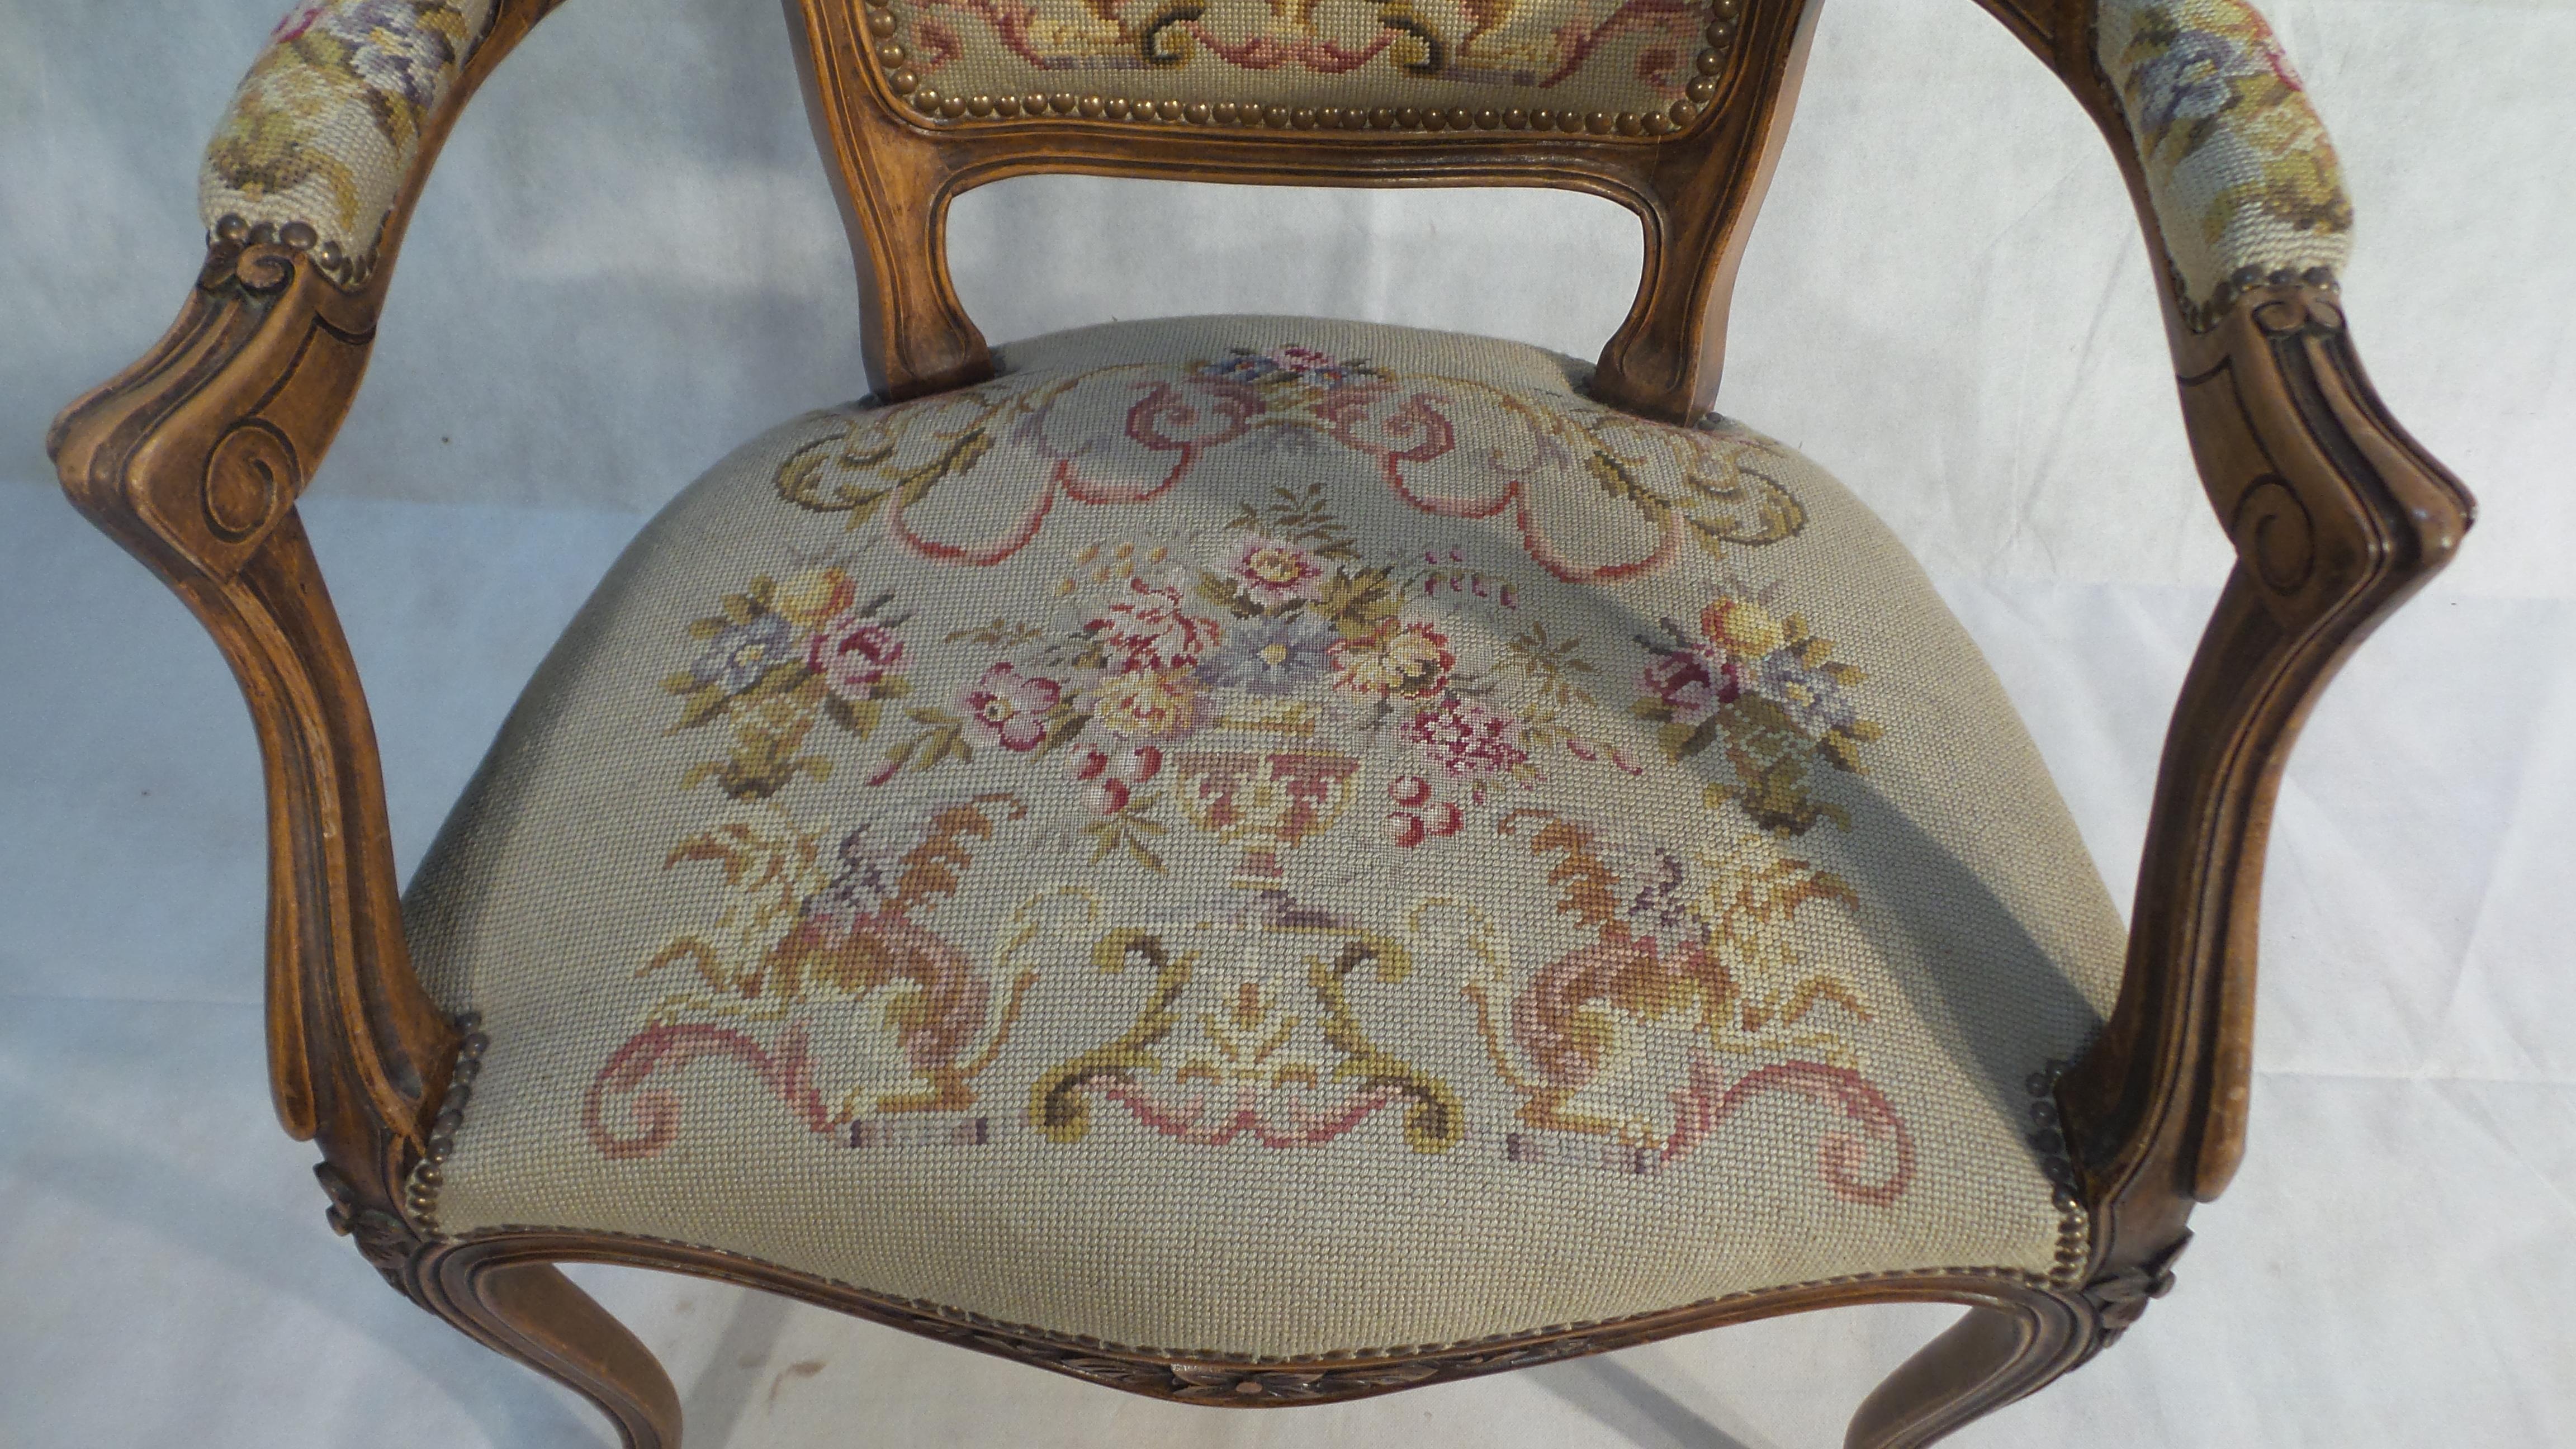 French Provincial Antique French Handmade petit point Tapestry Armchair c 1920 For Sale